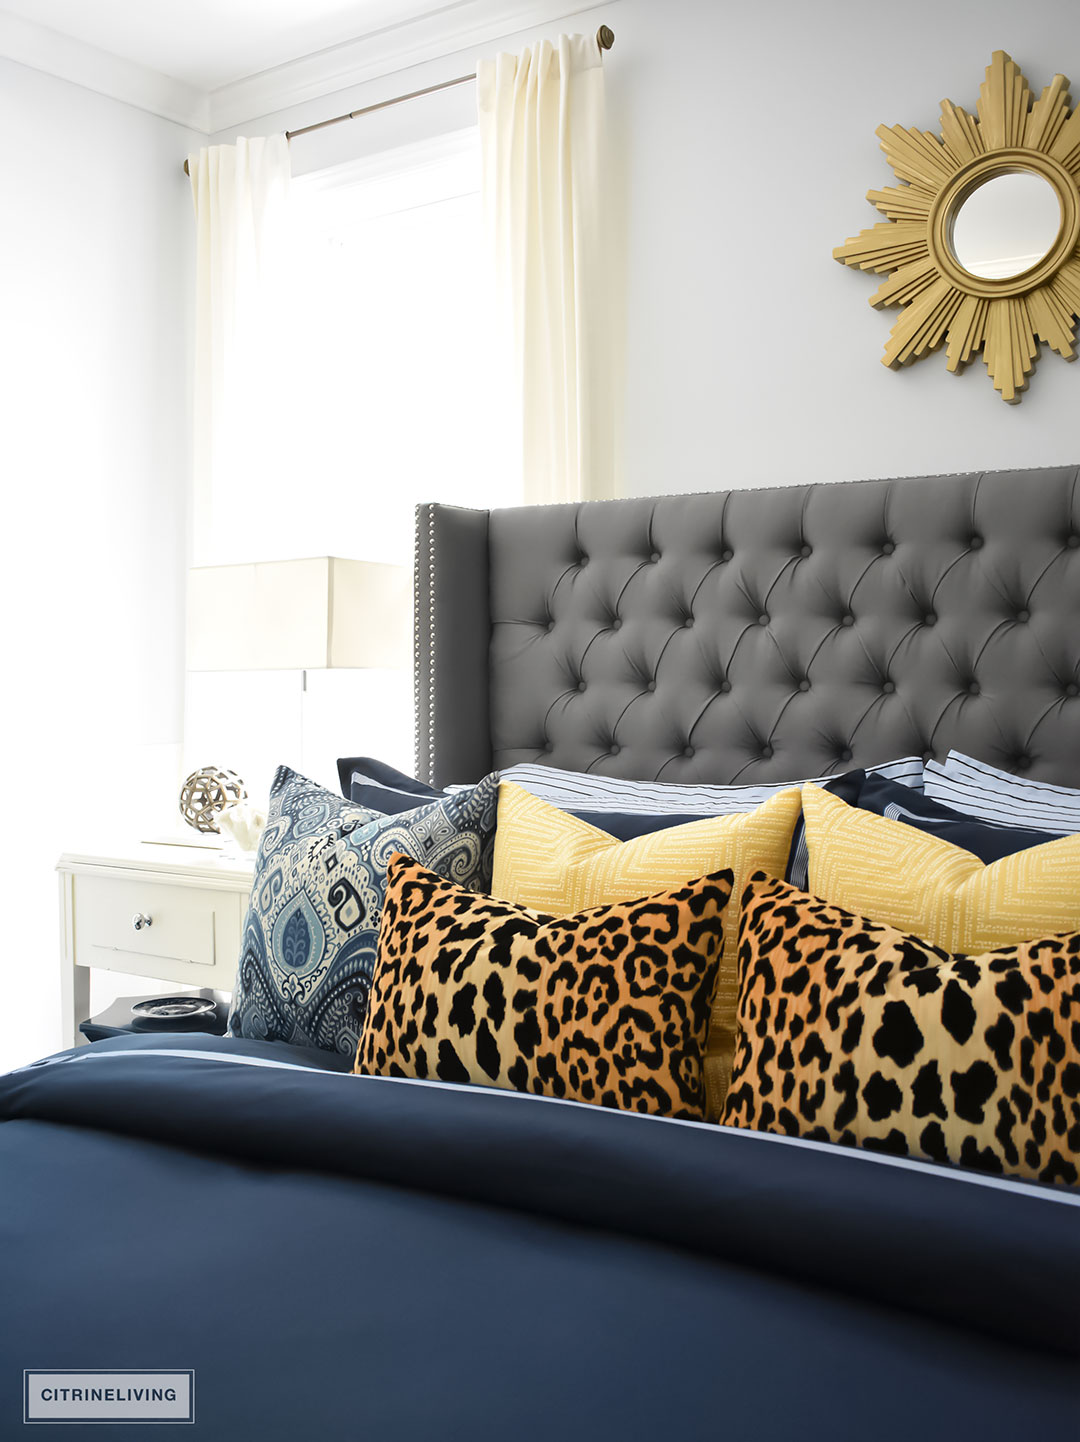 Gorgeous Blue Fall master bedroom - A masculine meets glam look with navy blue, stripes, paisley ikat, greek key, leopard and gold - perfectly tailored and chic!